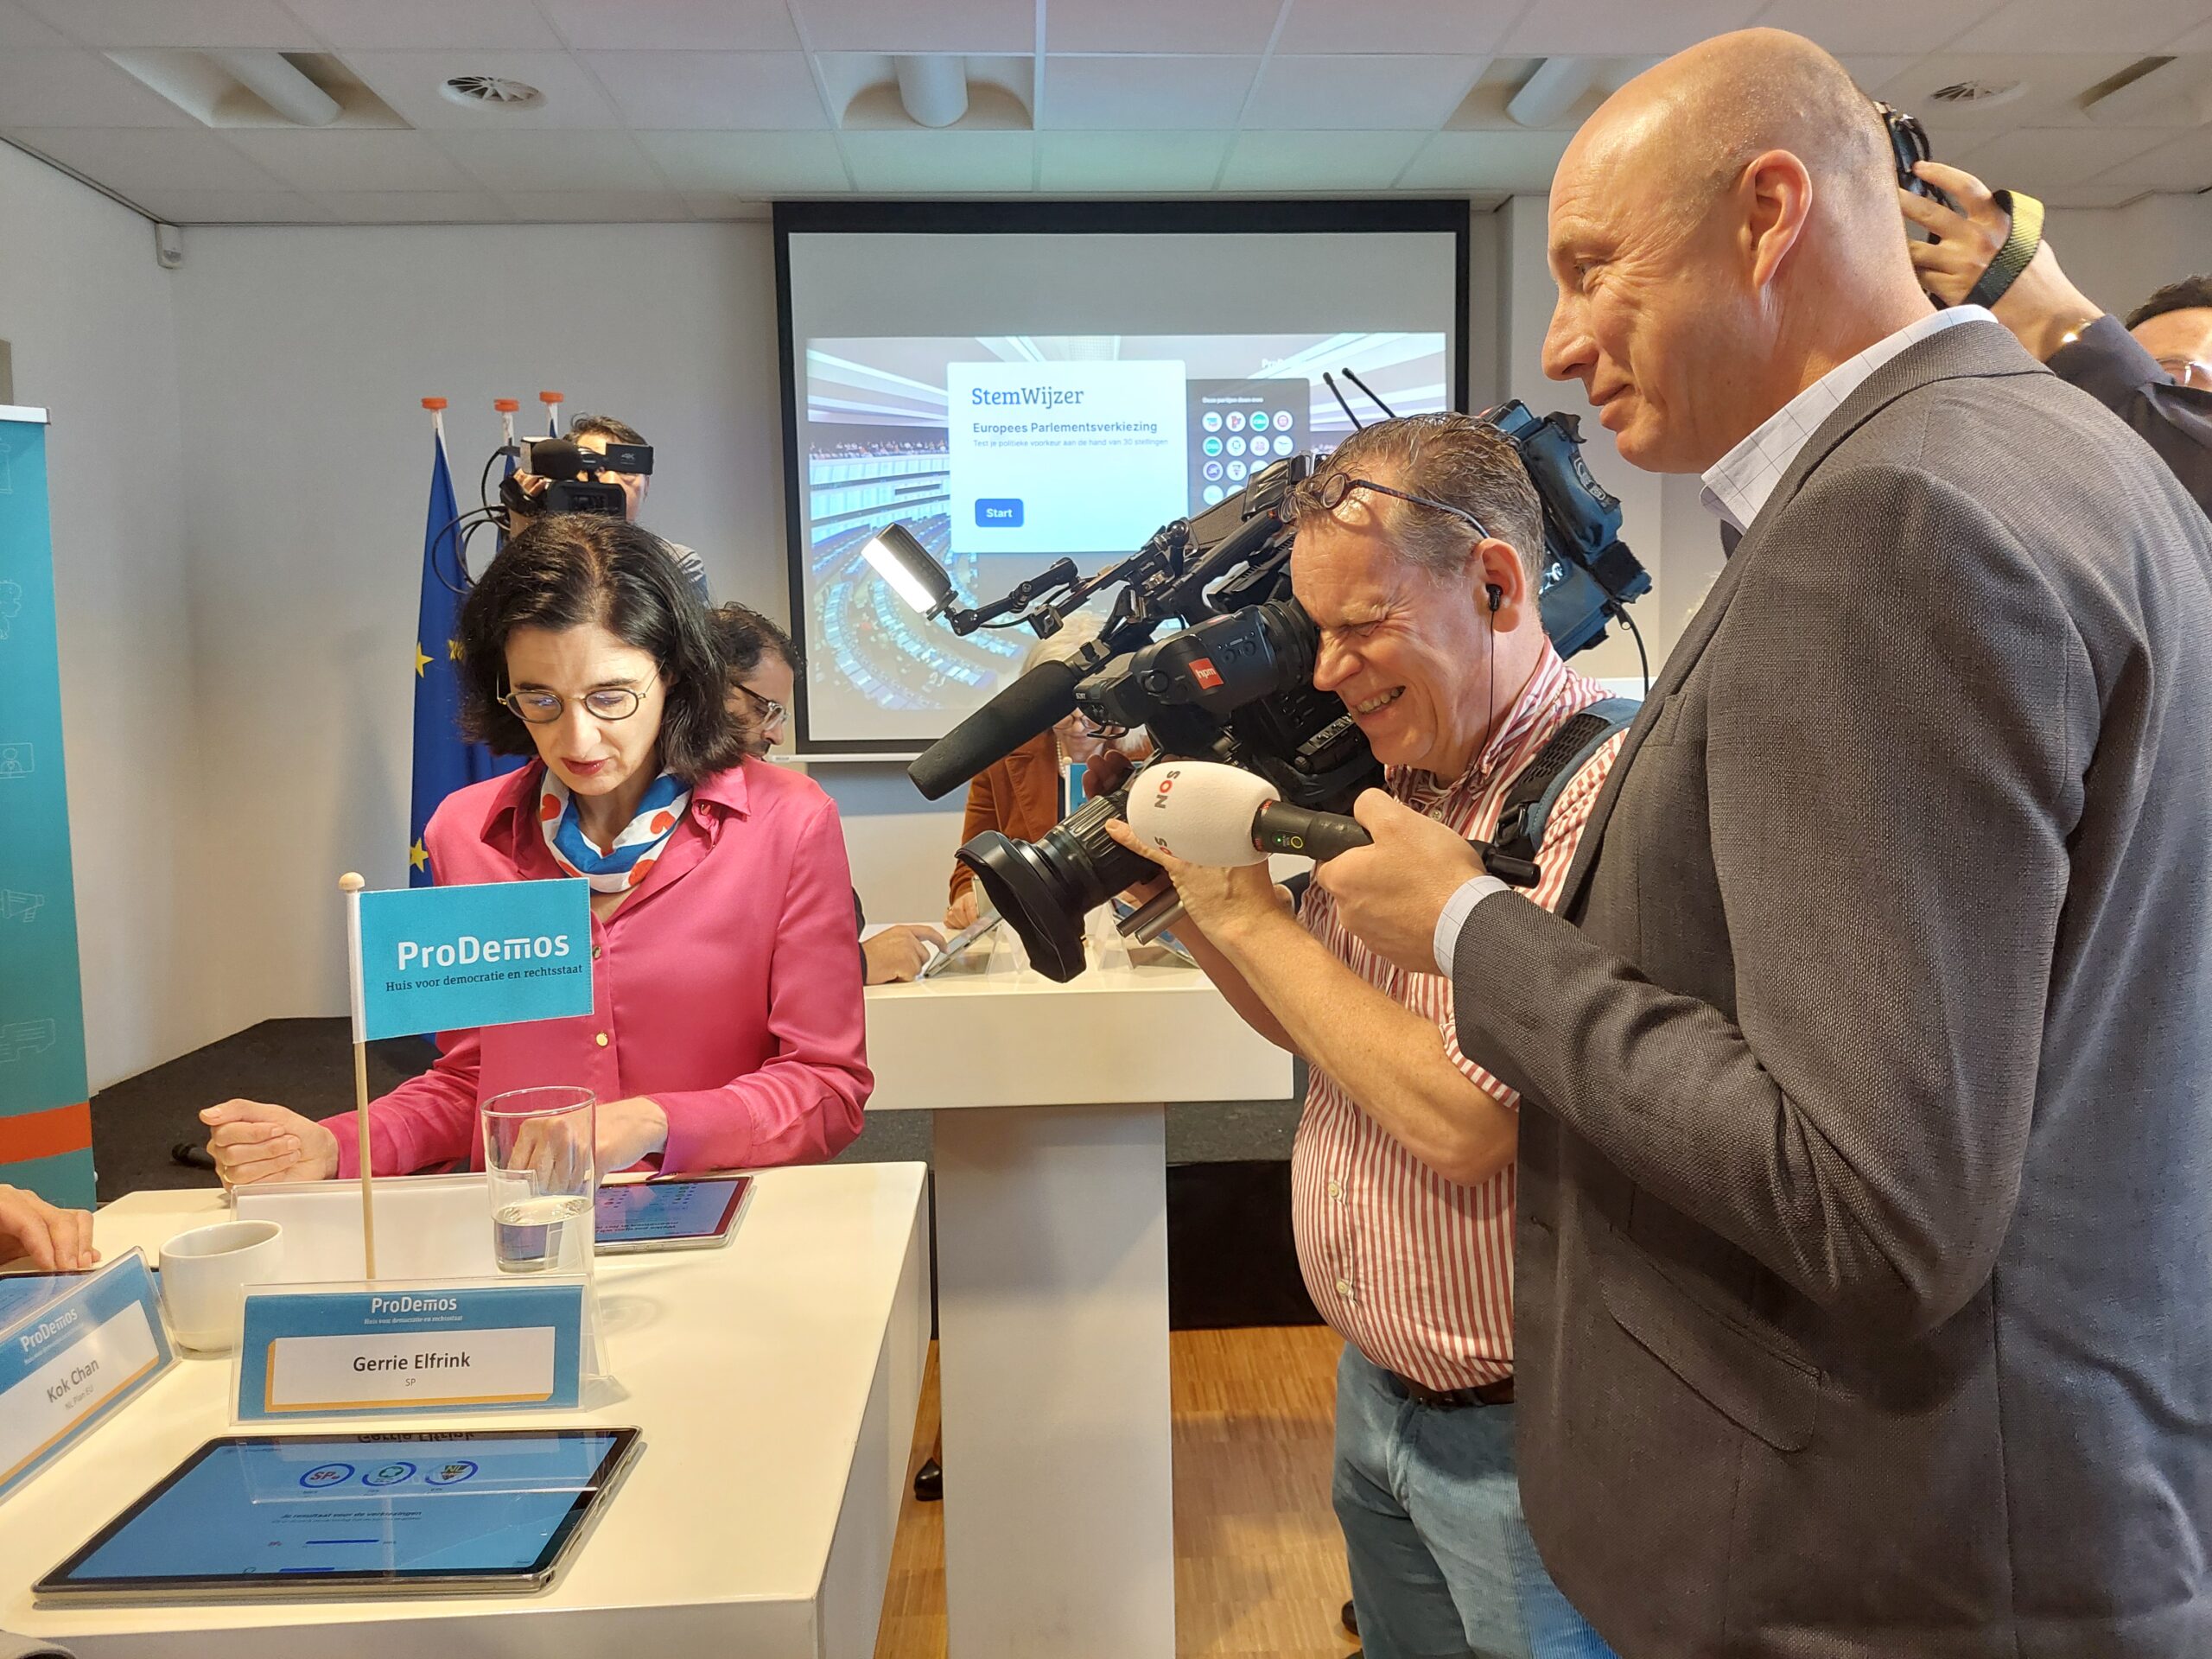 Stemwijzer voting tool launched to help European voters decide